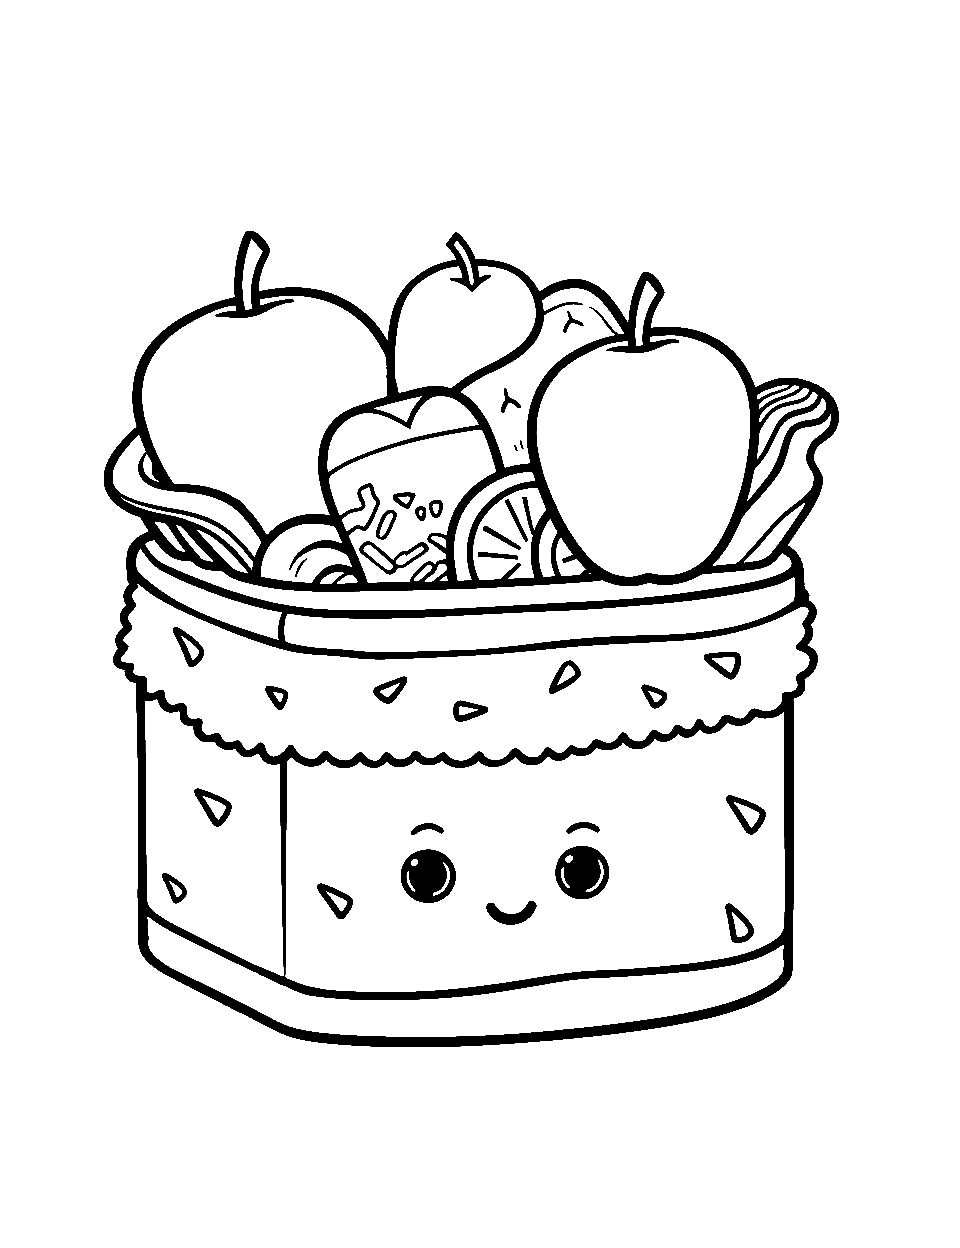 Cute Lunchbox Surprise Food Coloring Page - A cute-looking open lunchbox with a bunch of foods inside.